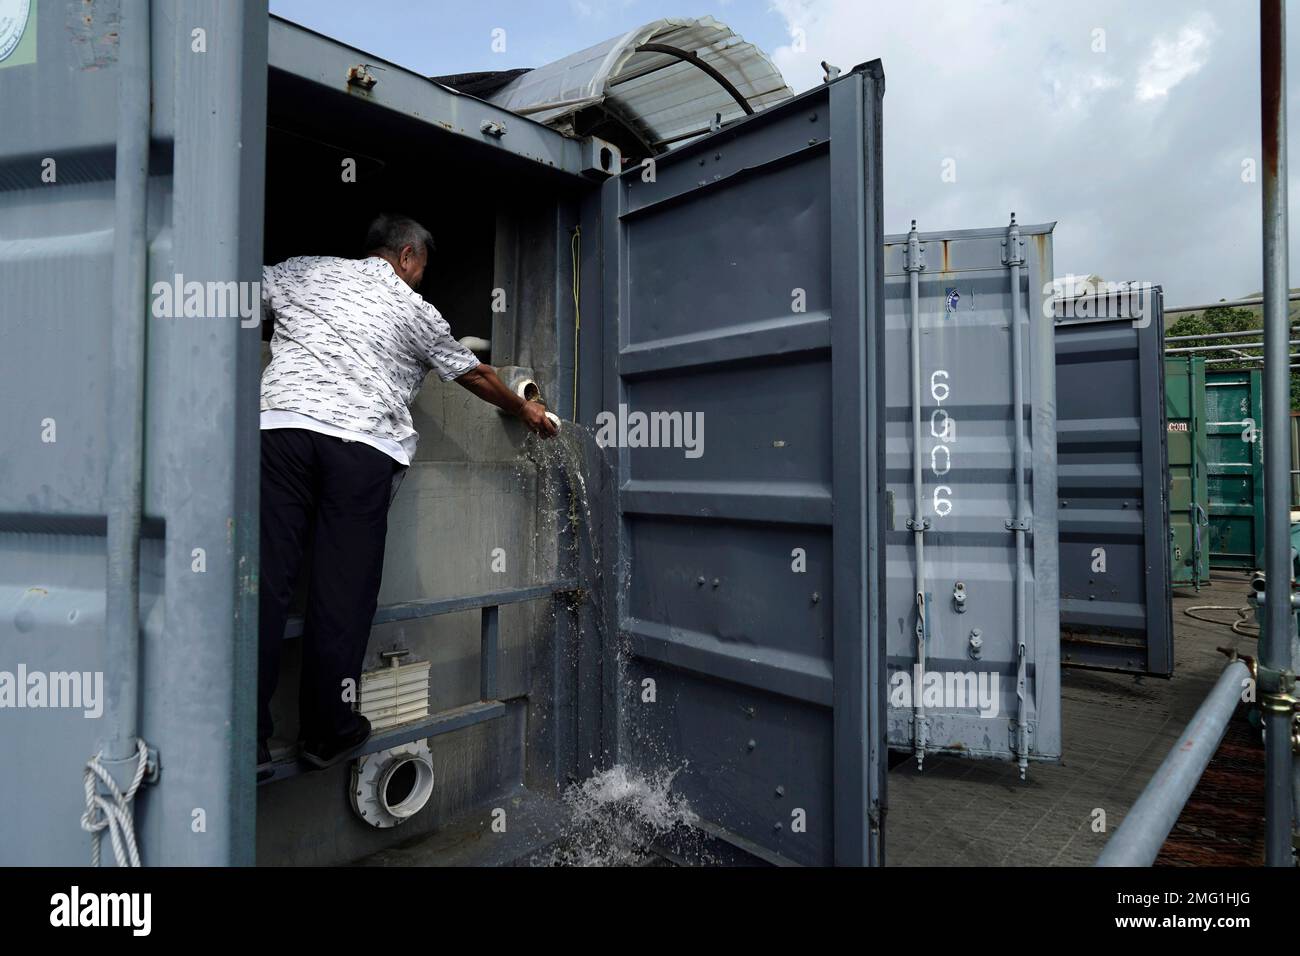 Arthur Lee, owner of MoVertical Farm, works on his fish tank inside a  shipping container in Yuen Long, Hong Kong's New Territories Tuesday, Sept.  22, 2020. After a career making the shipping